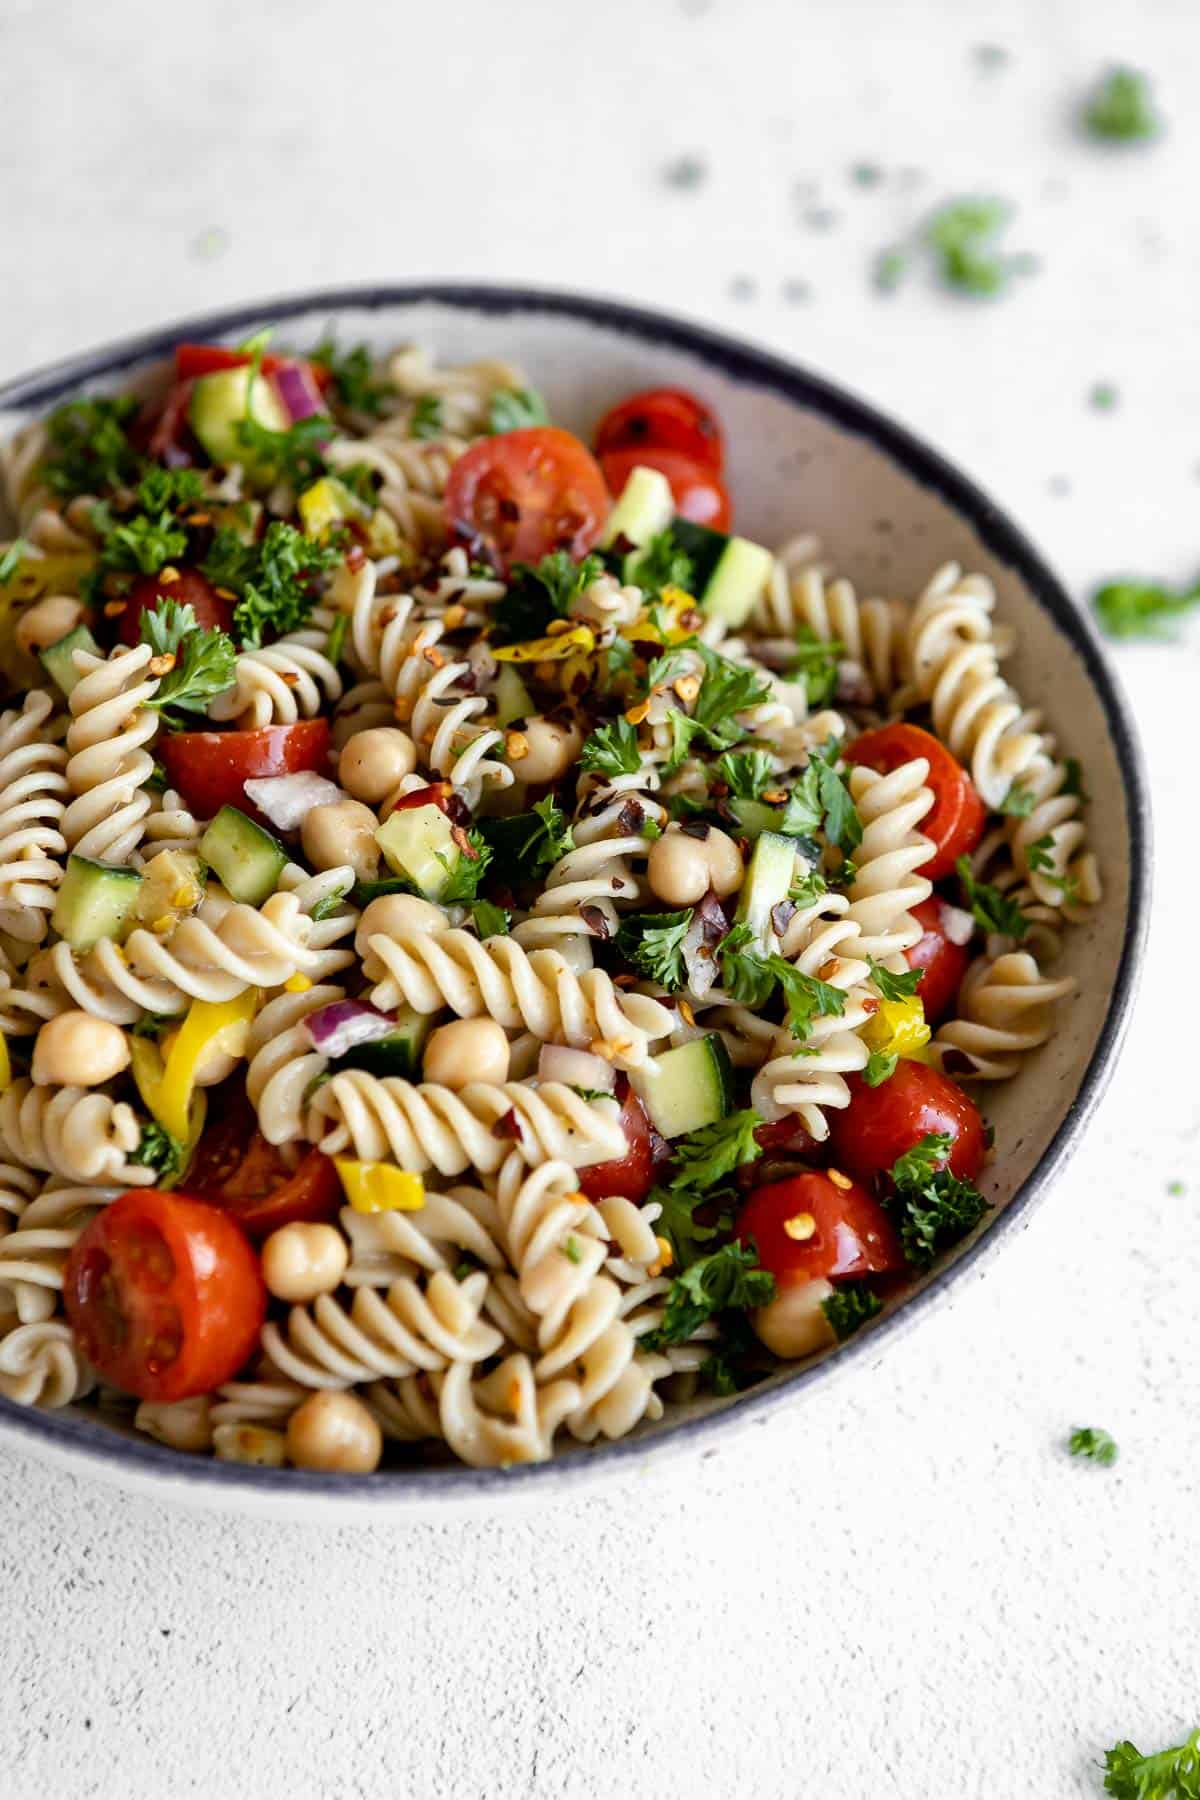 angled view of the pasta salad with tomatoes and cucumber and chickpeas